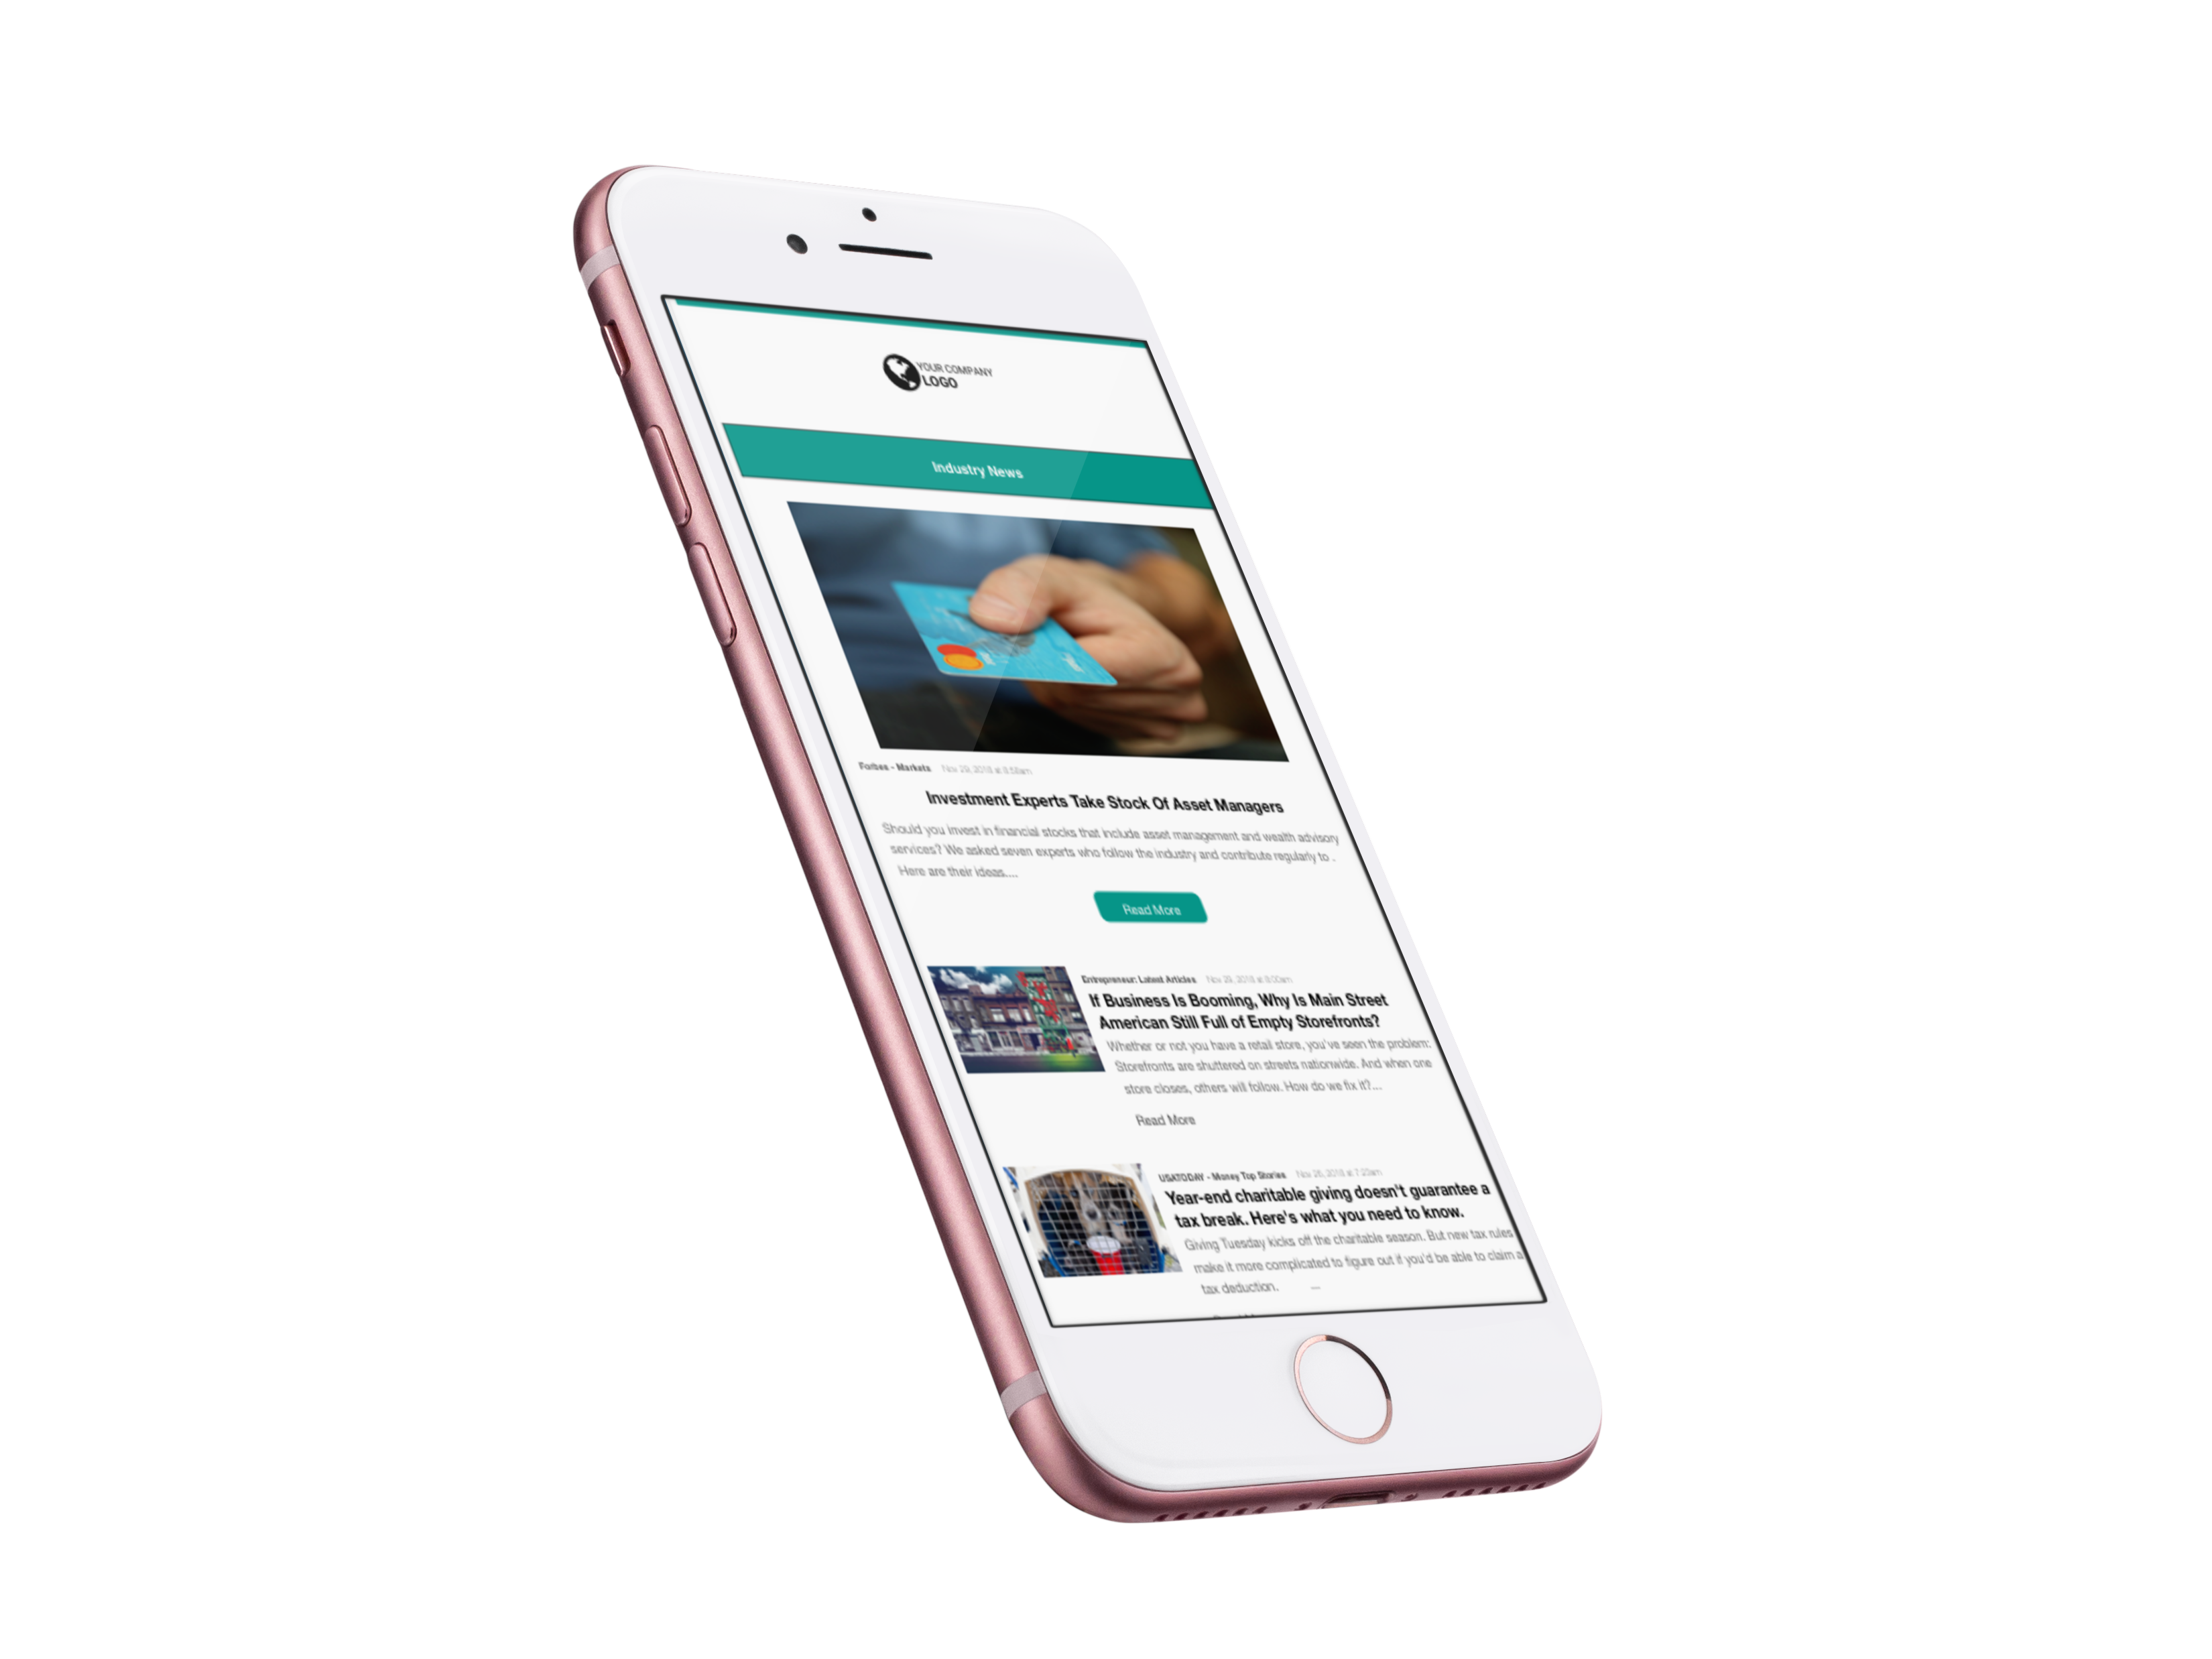 Build your newsletter to be available on a variety of devices including mobile